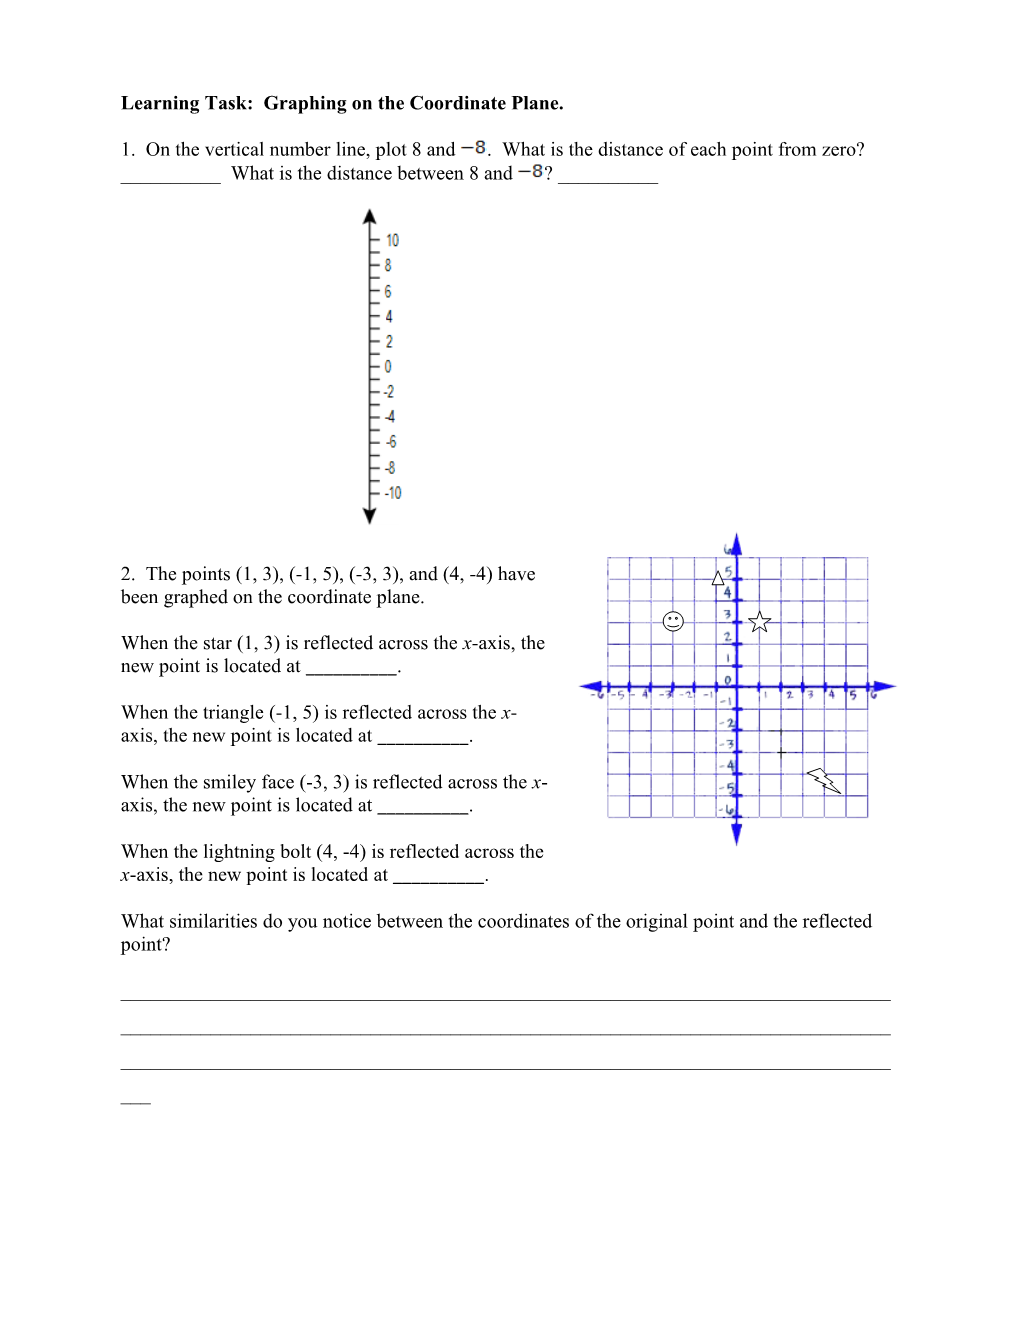 Learning Task: Graphing on the Coordinate Plane